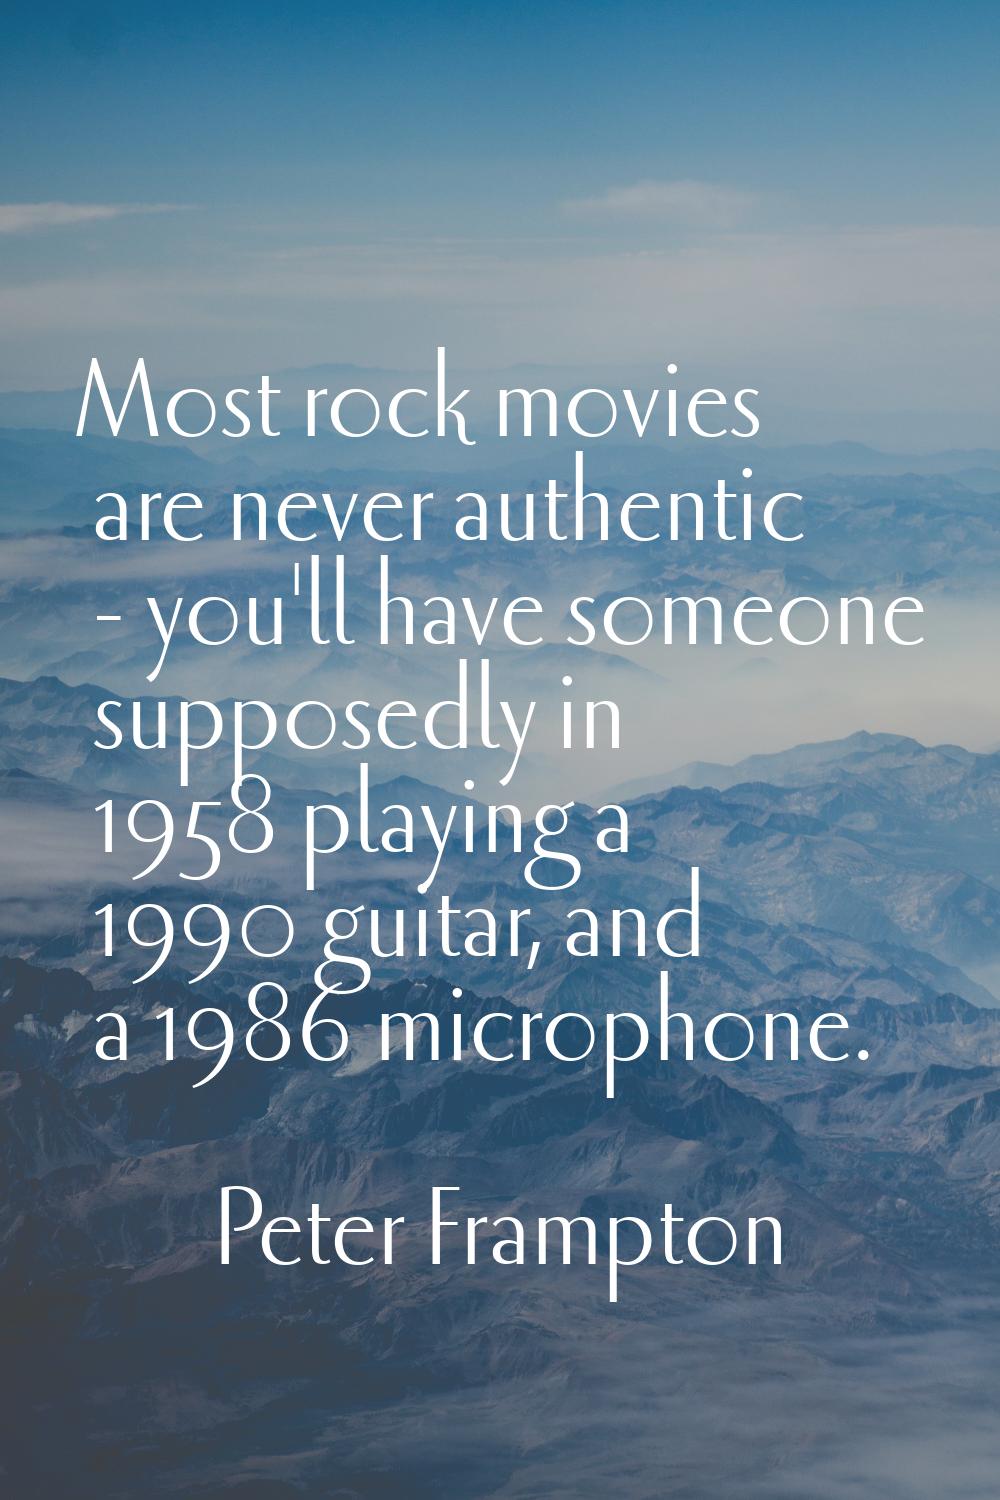 Most rock movies are never authentic - you'll have someone supposedly in 1958 playing a 1990 guitar